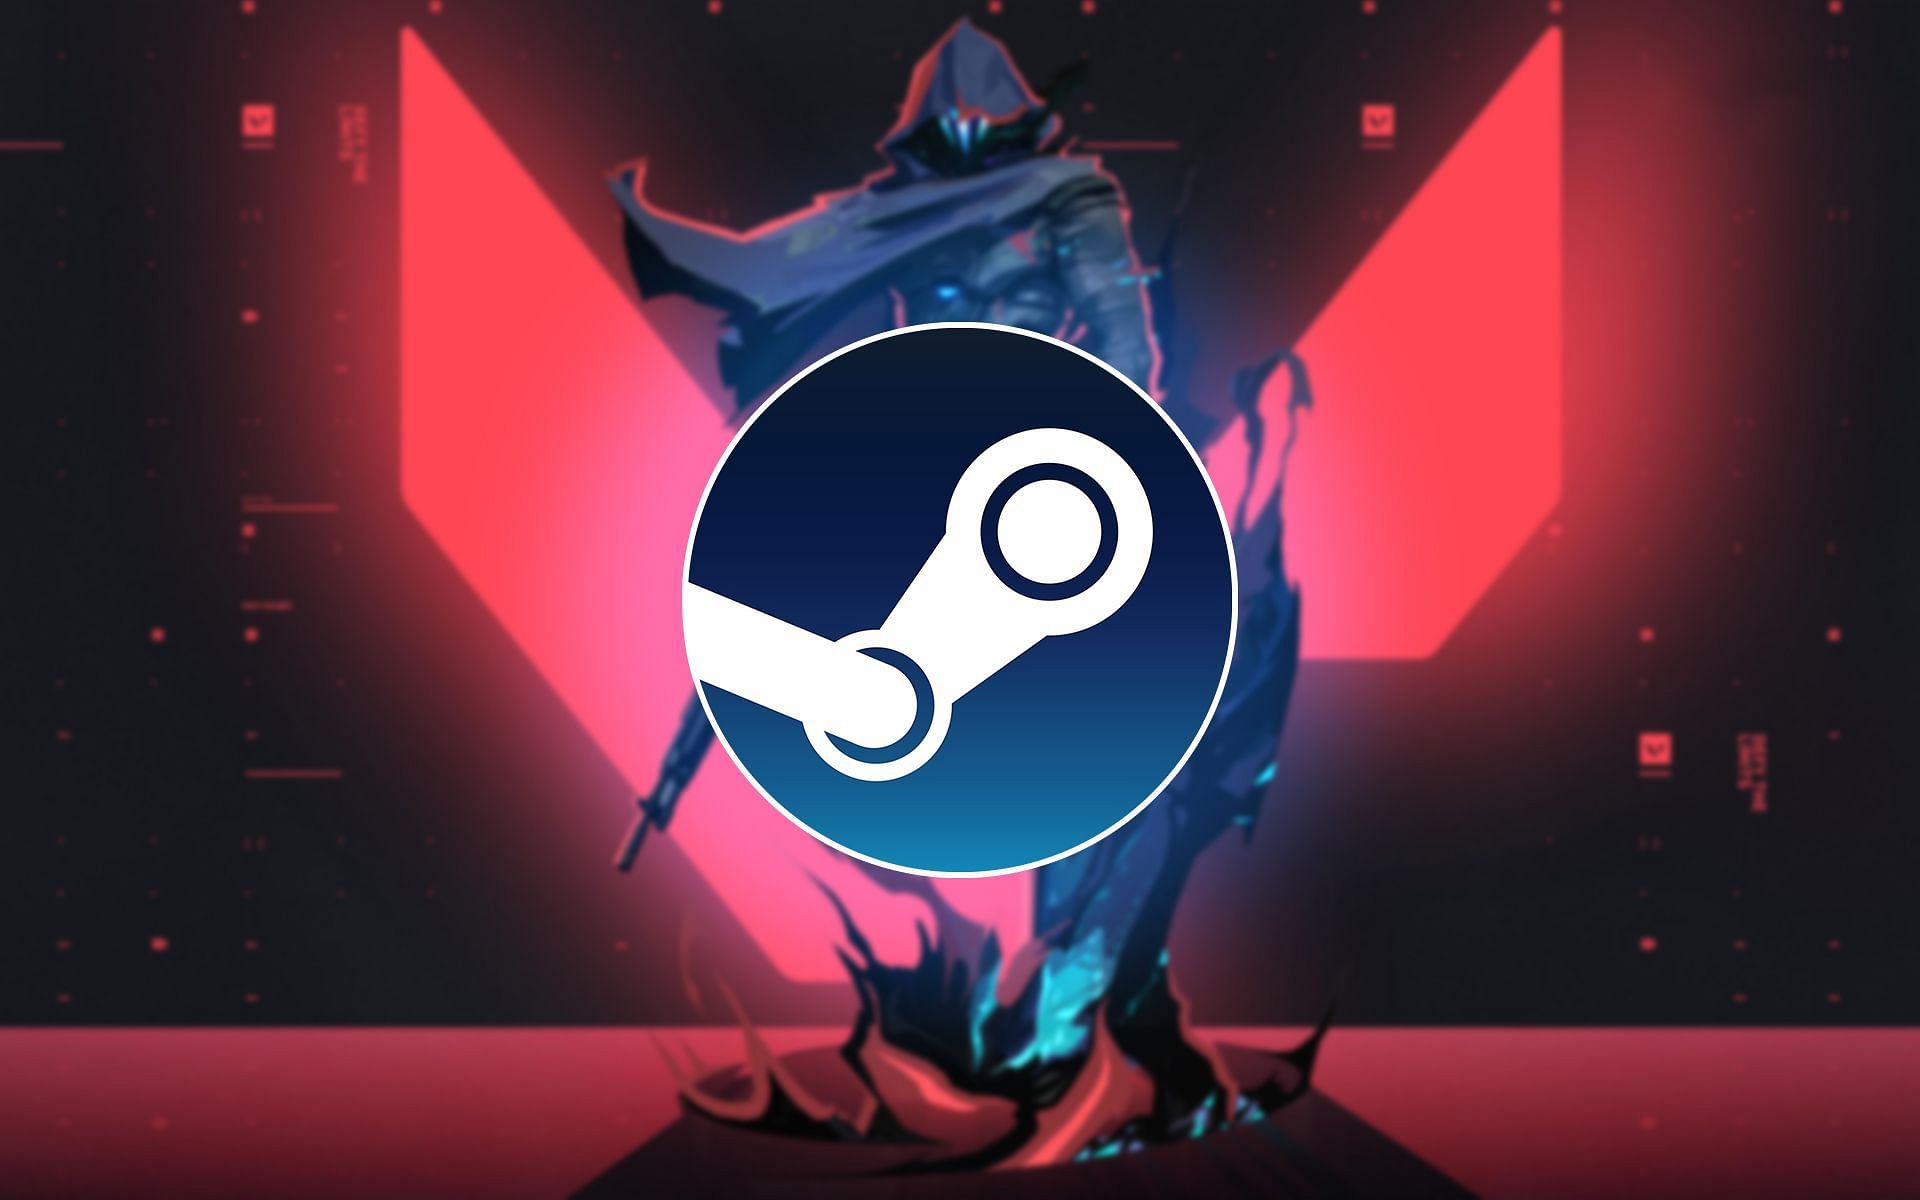 Valorant is available on Epic Games Store, but why not Steam? (Image by Sportskeeda)